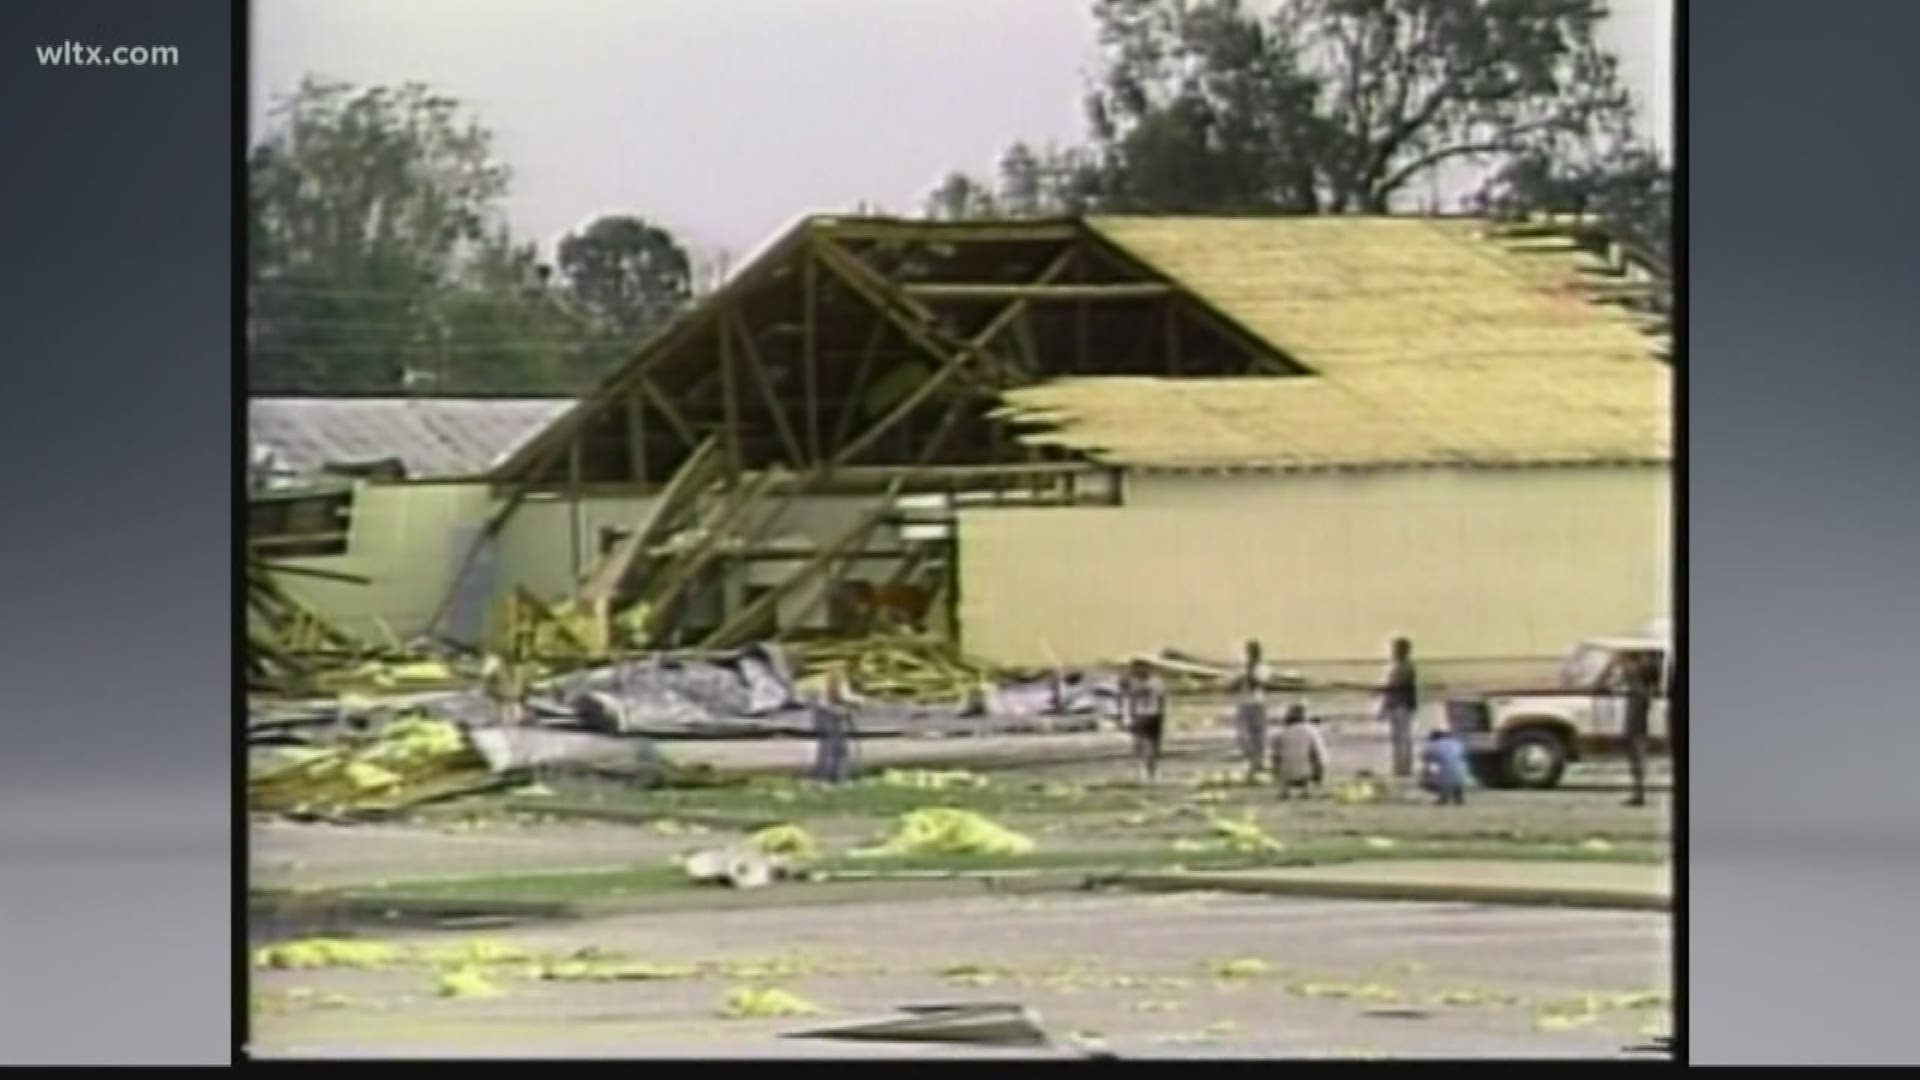 Sumter residents were left without power for weeks when Hurricane Hugo hit in 1989